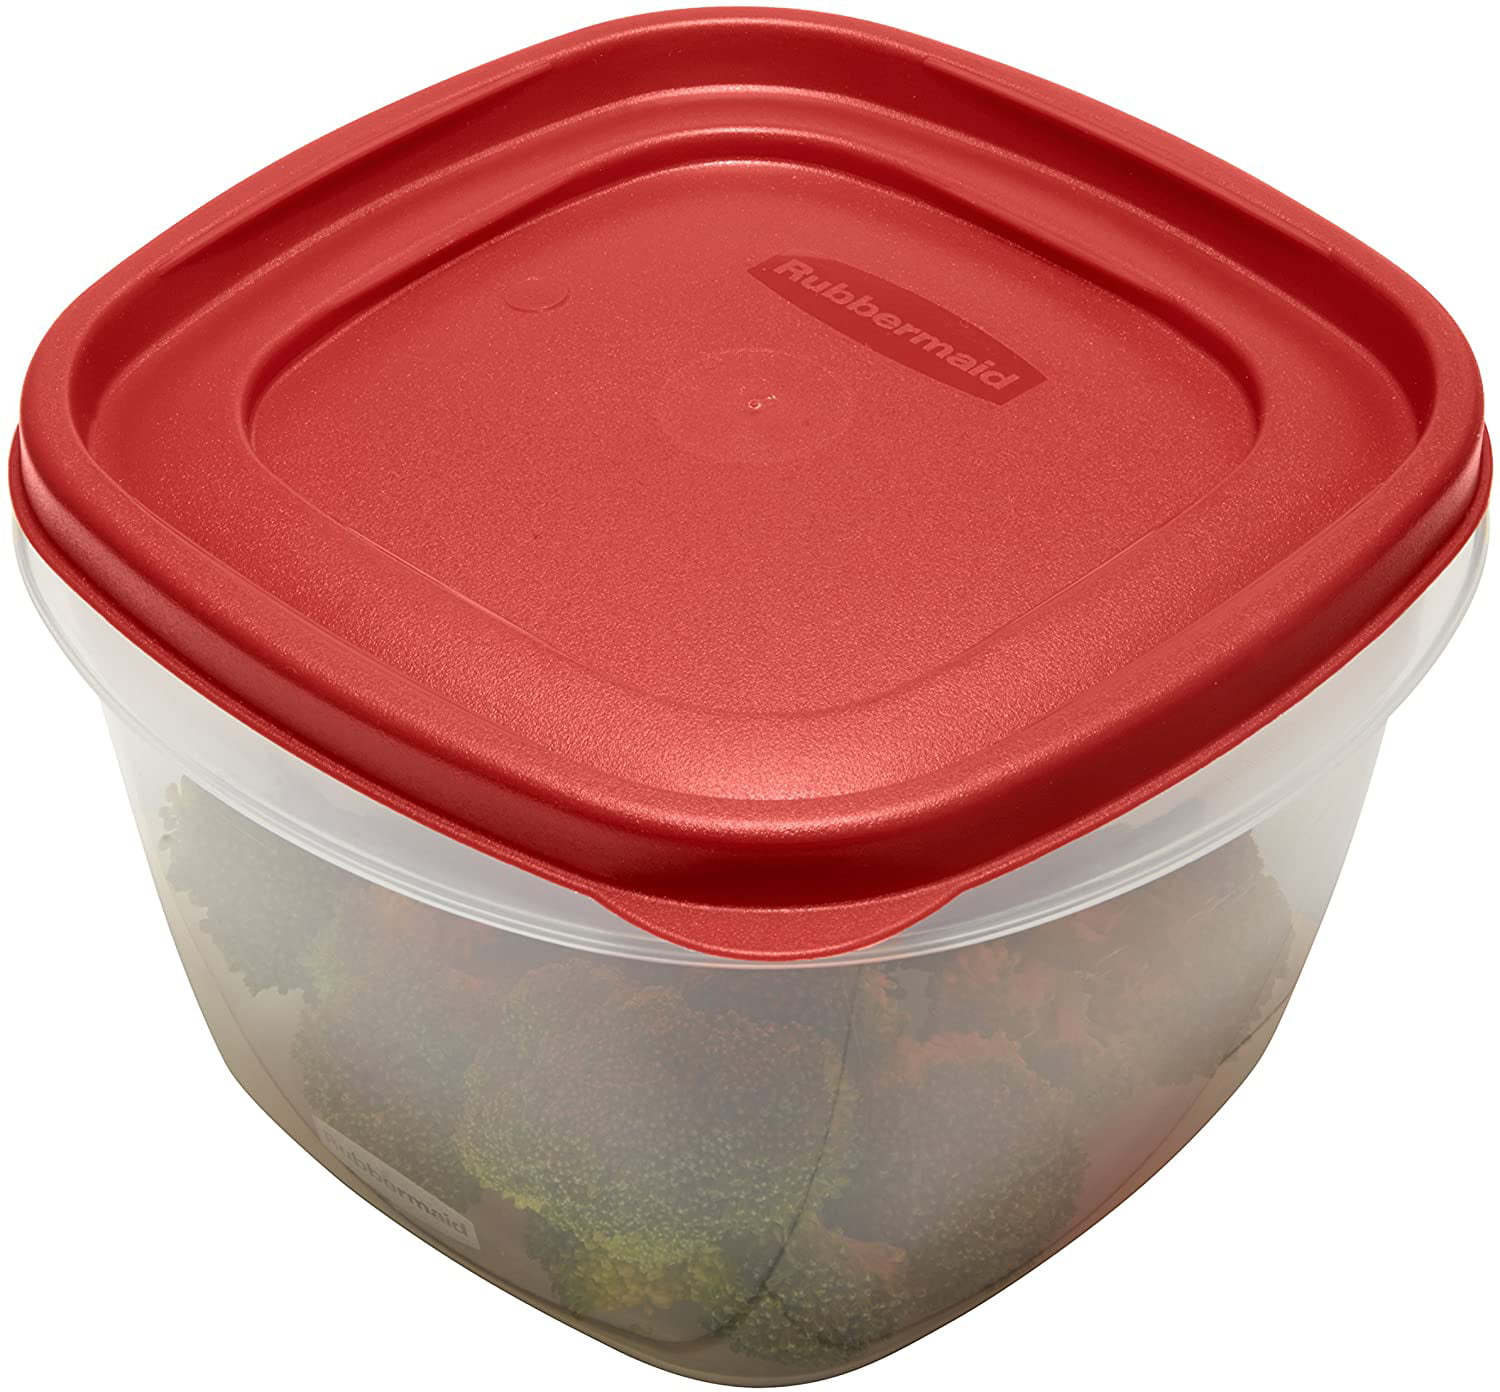 NEW Genuine Rubbermaid Lids for Replacement Easy Find Lids for 3-Cup,  5-Cup, and 7-Cup Food Storage Containers SET OF TWO (2) LIDS ONLY (357)